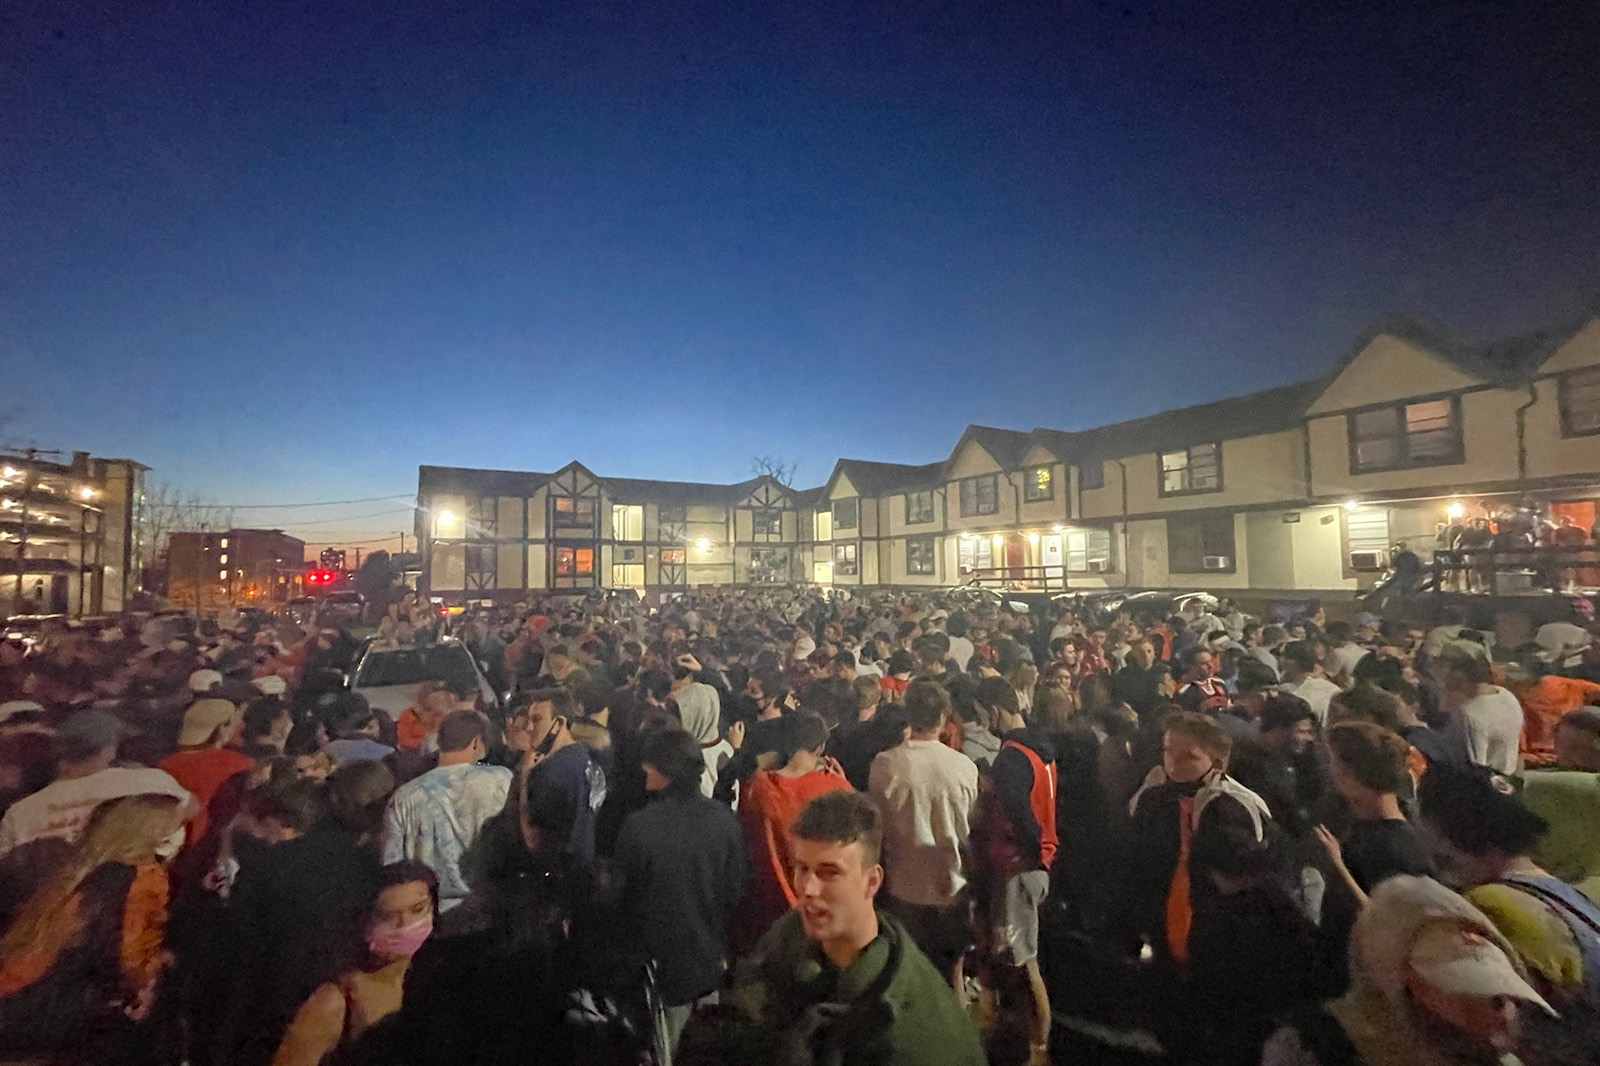 Students gather at Castle Court after SU men's basketball wins against WVU, putting them in the Sweet Sixteen on March 21, 2021